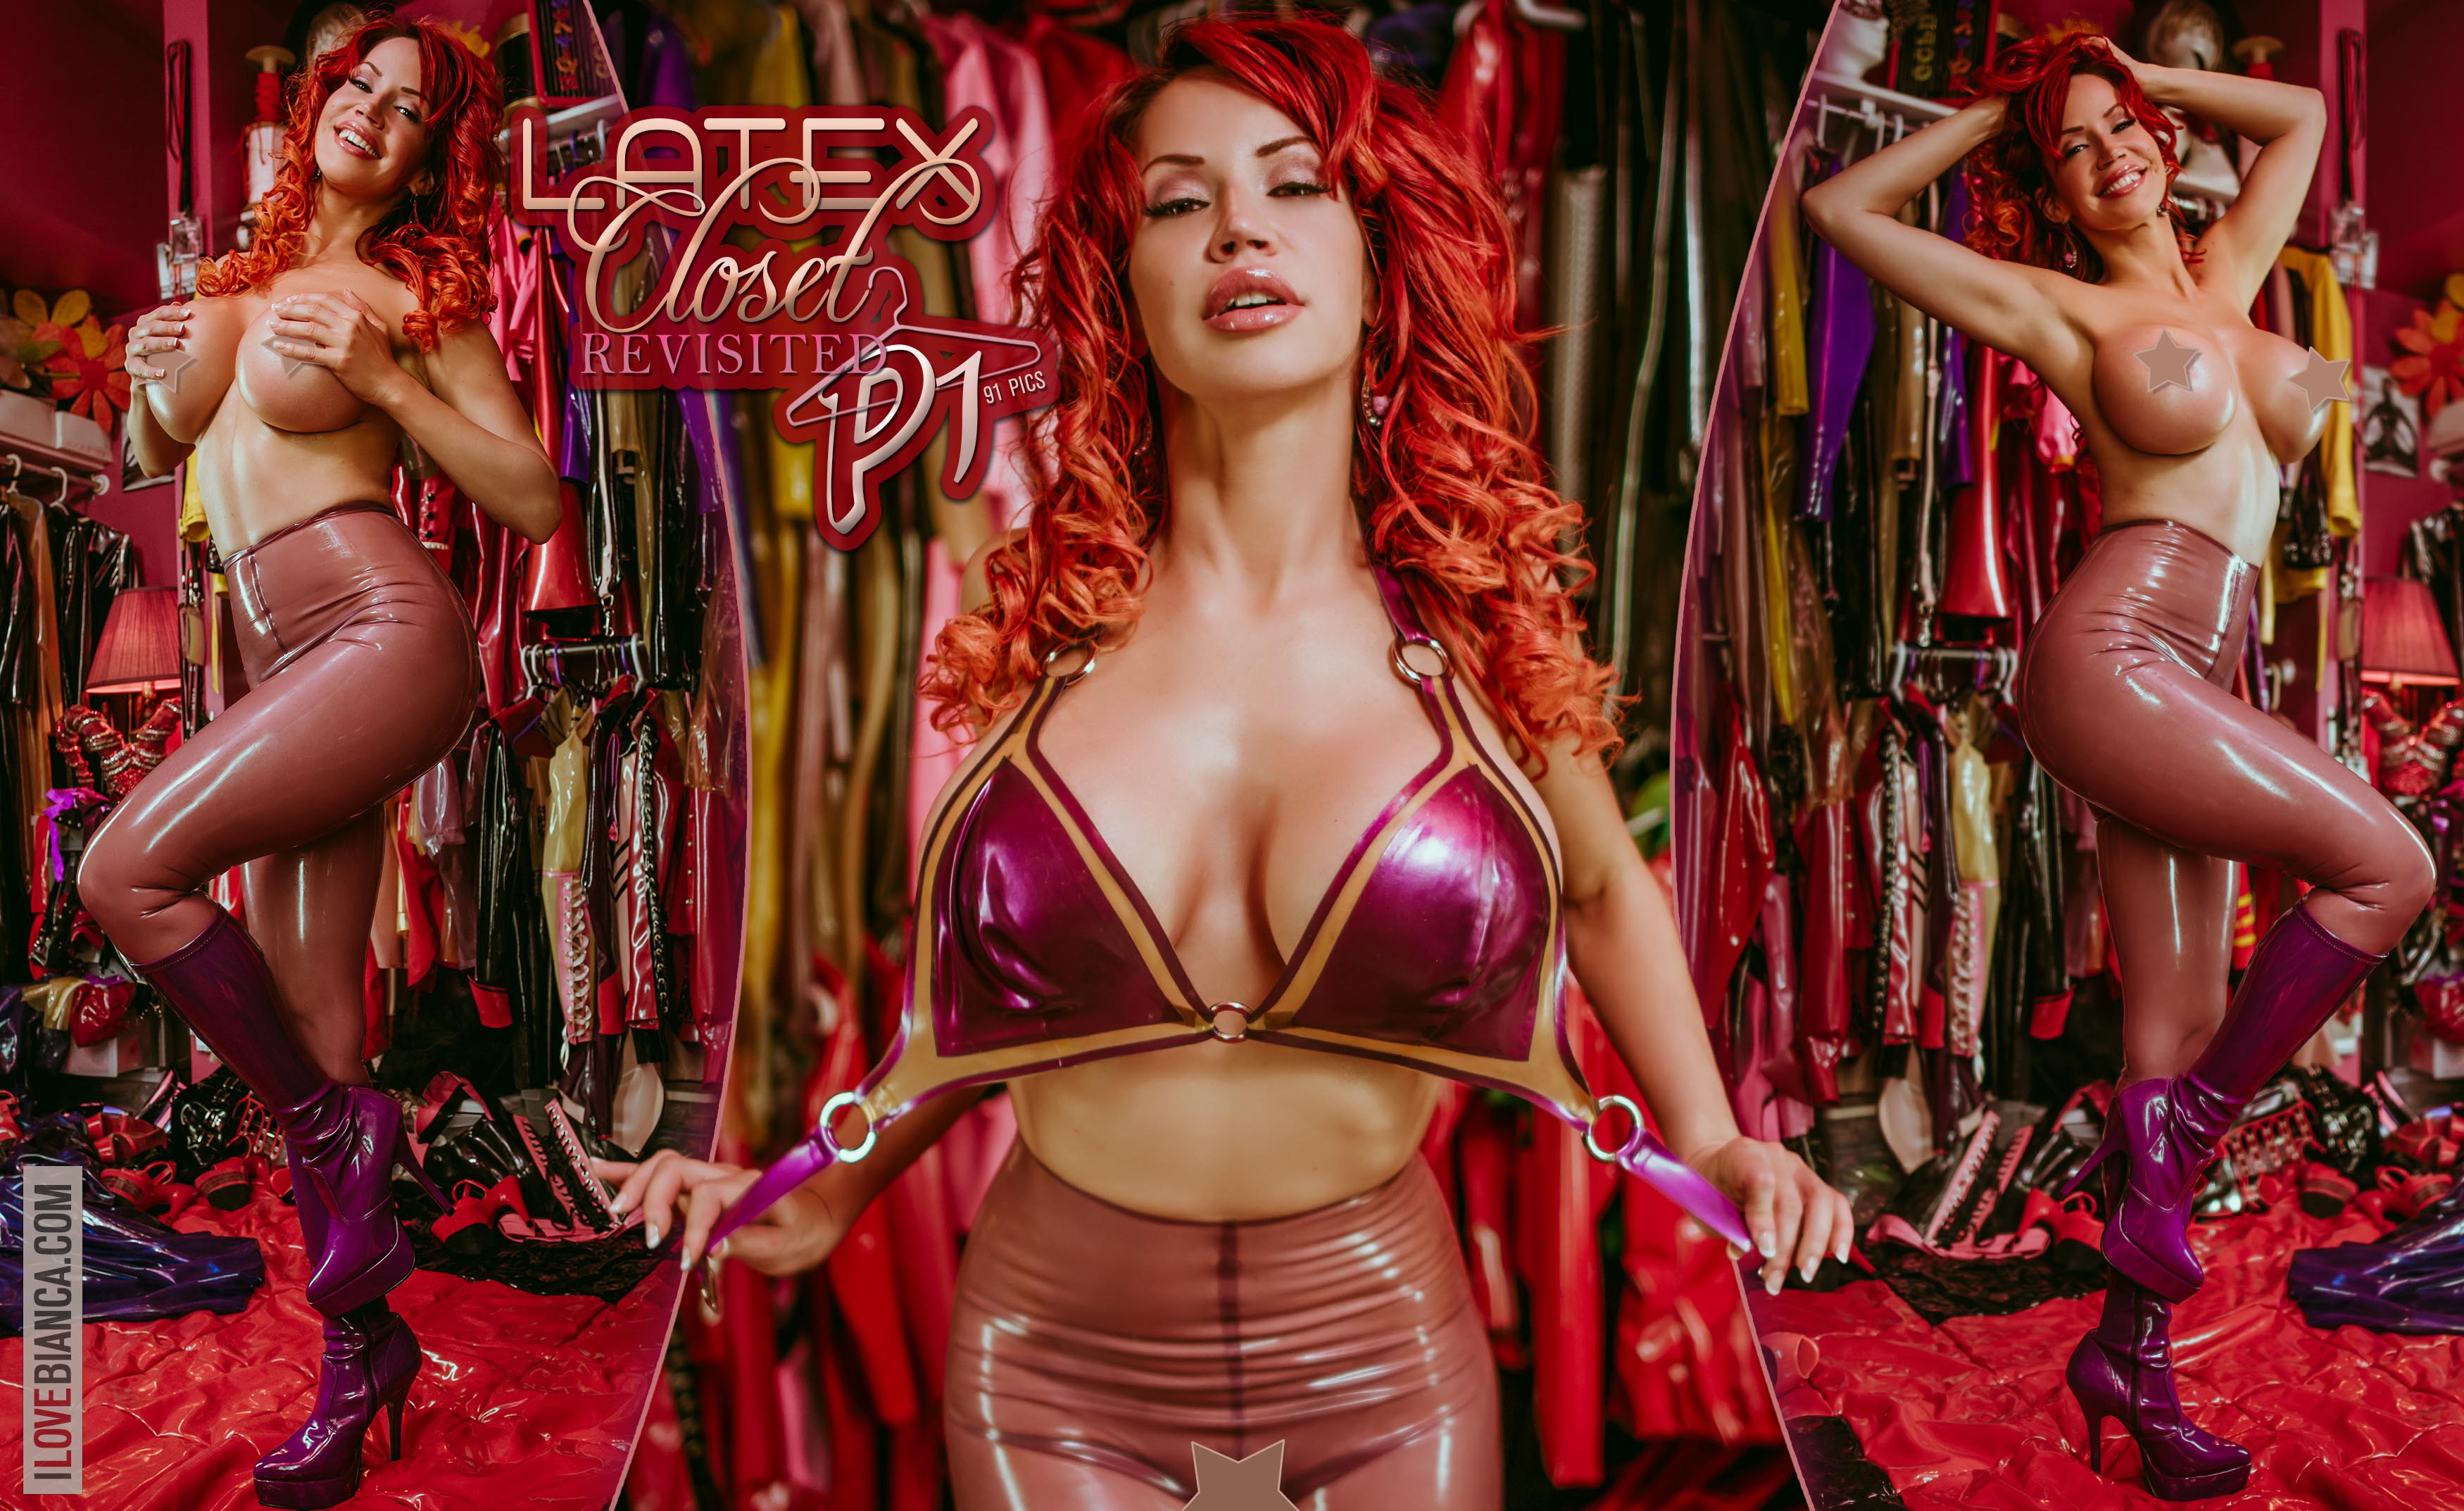 05 latex closet revisited p1 covers 06